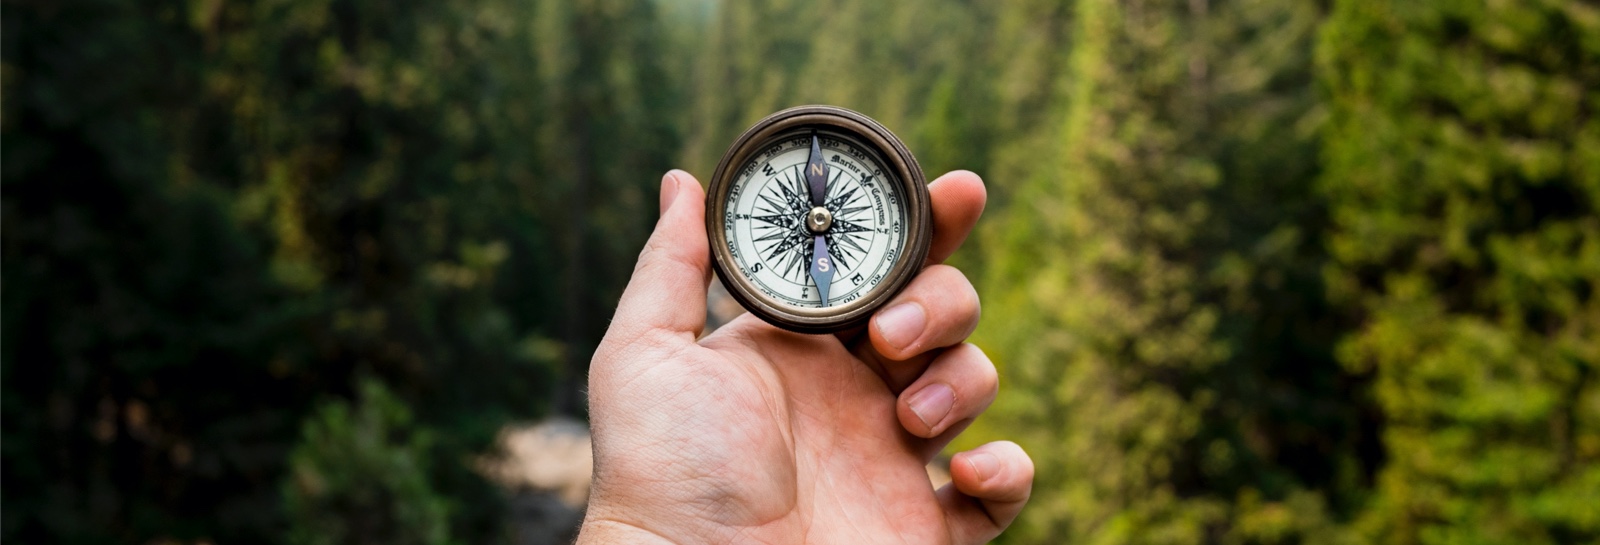 a person holding a compass in the wilderness